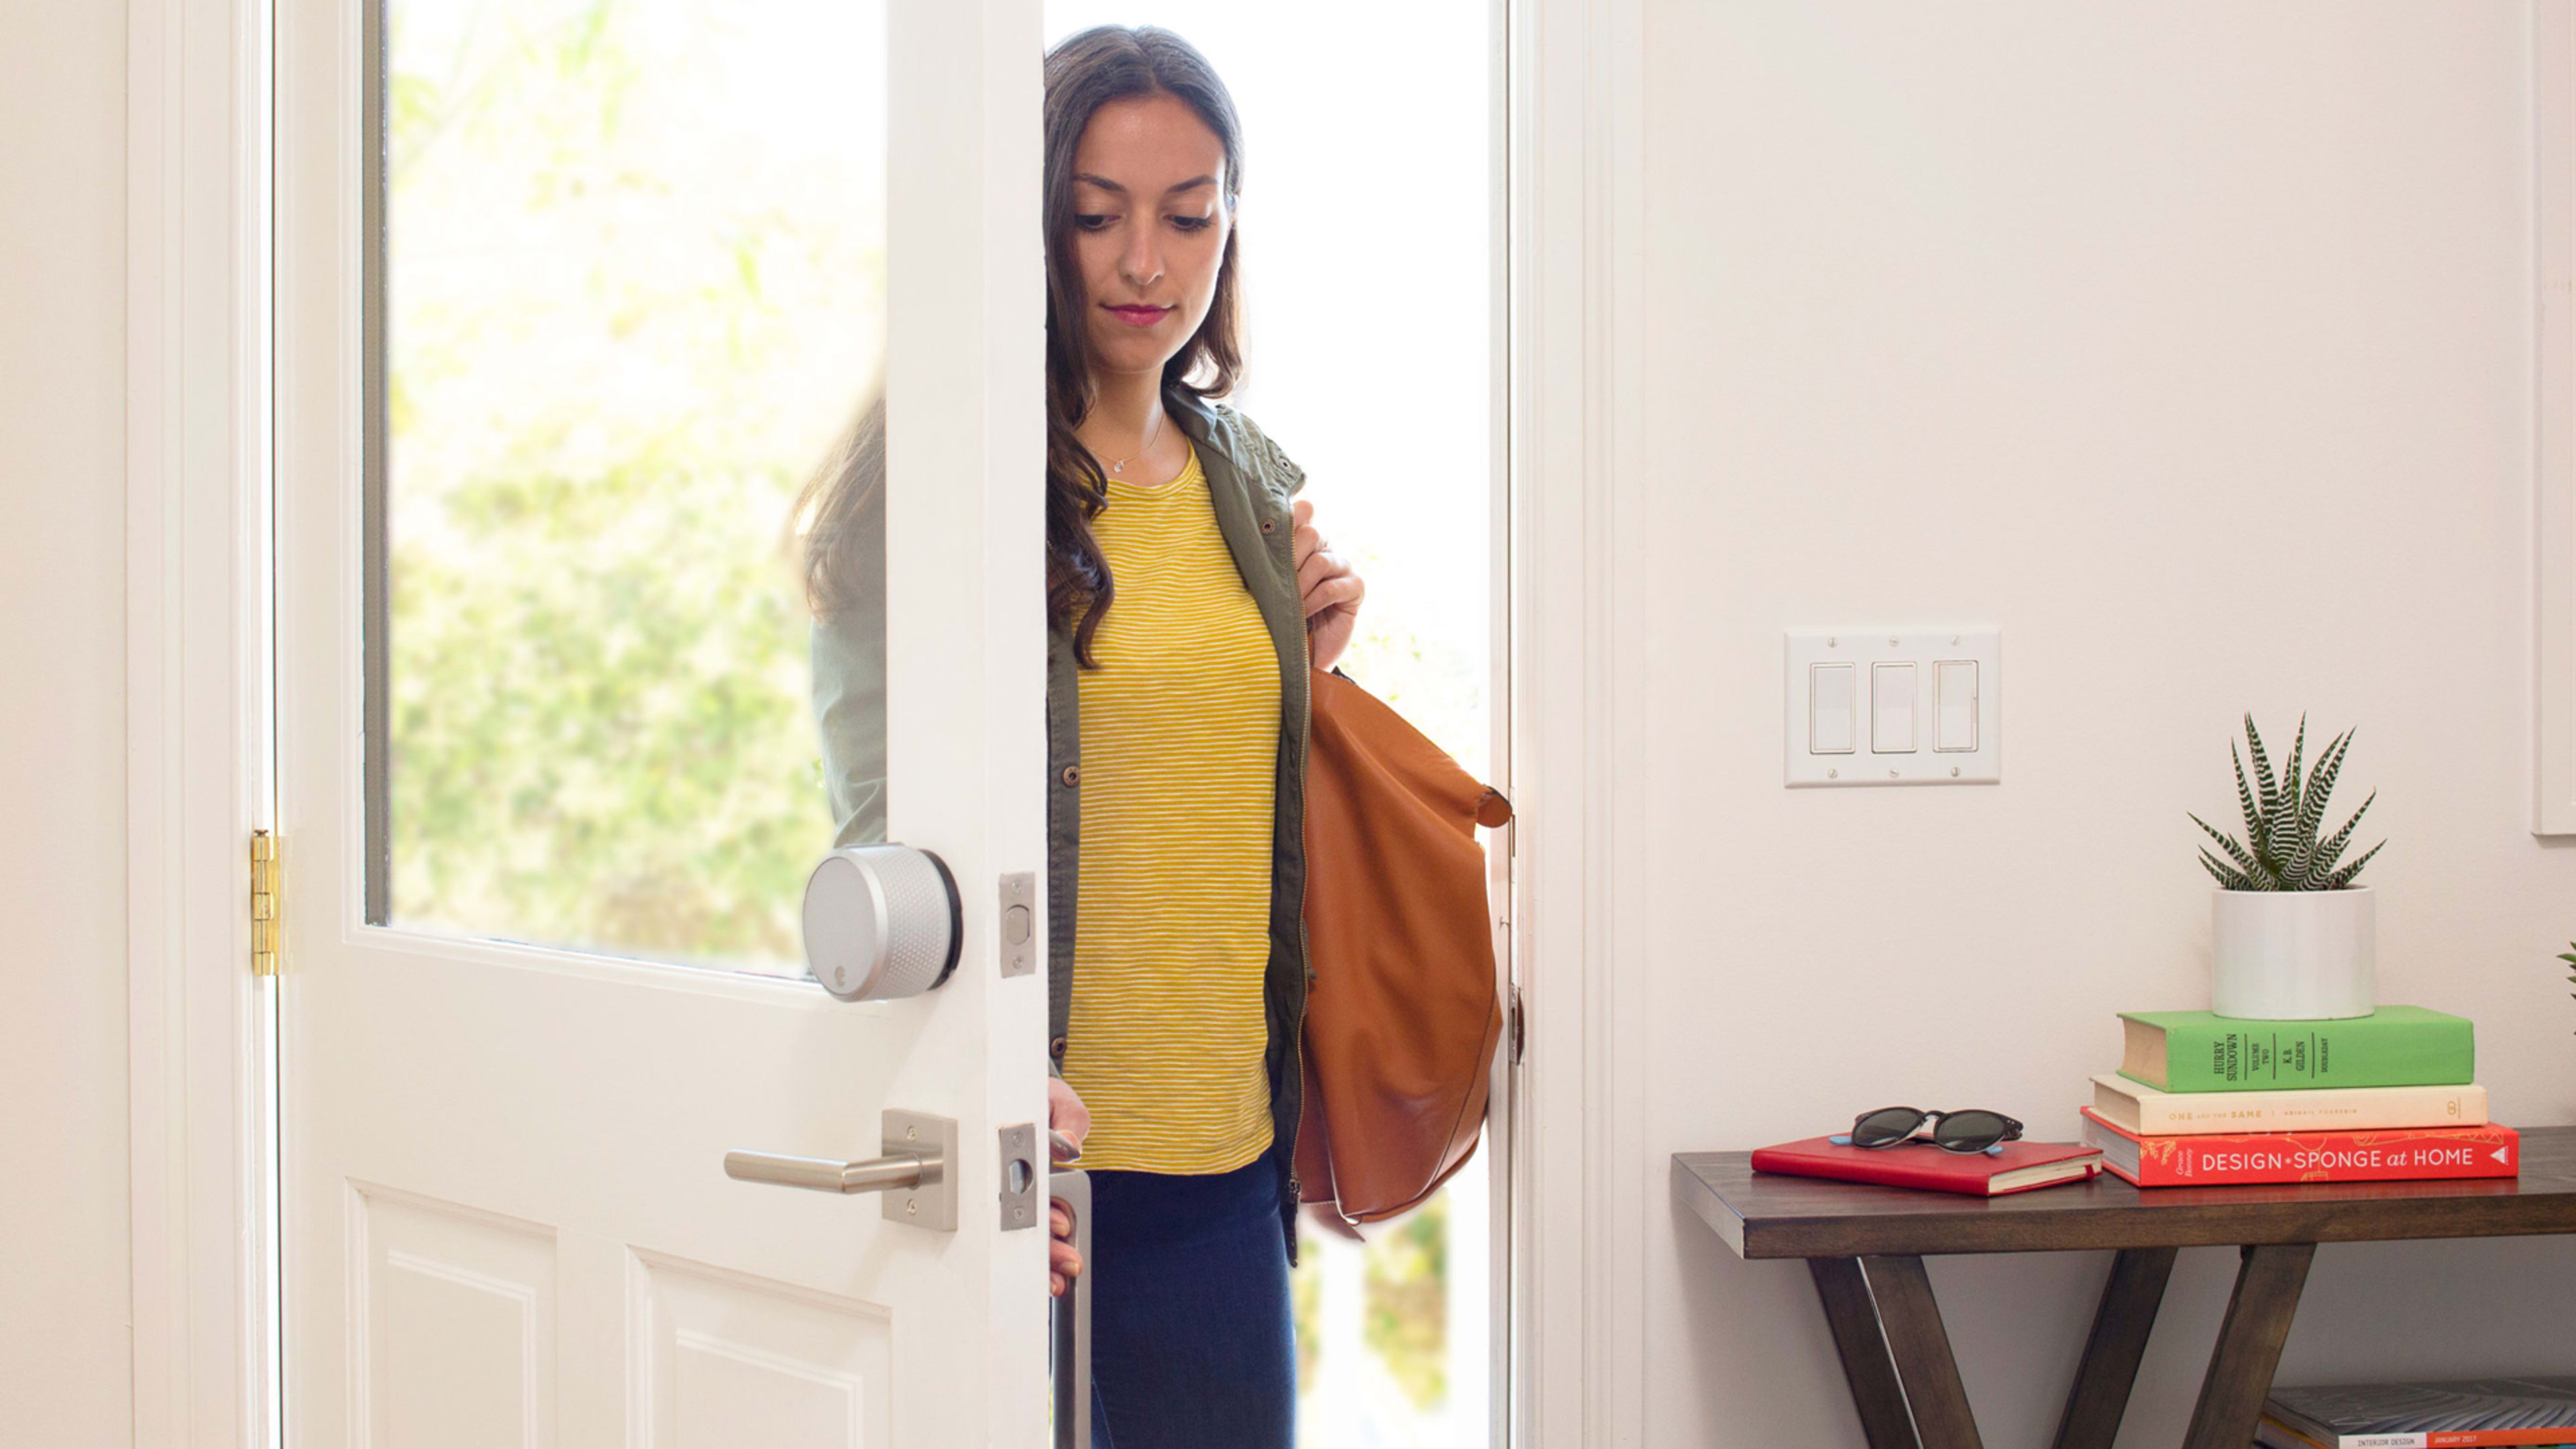 Who needs keys? August has a plan to get you in the door of your Airbnb rental